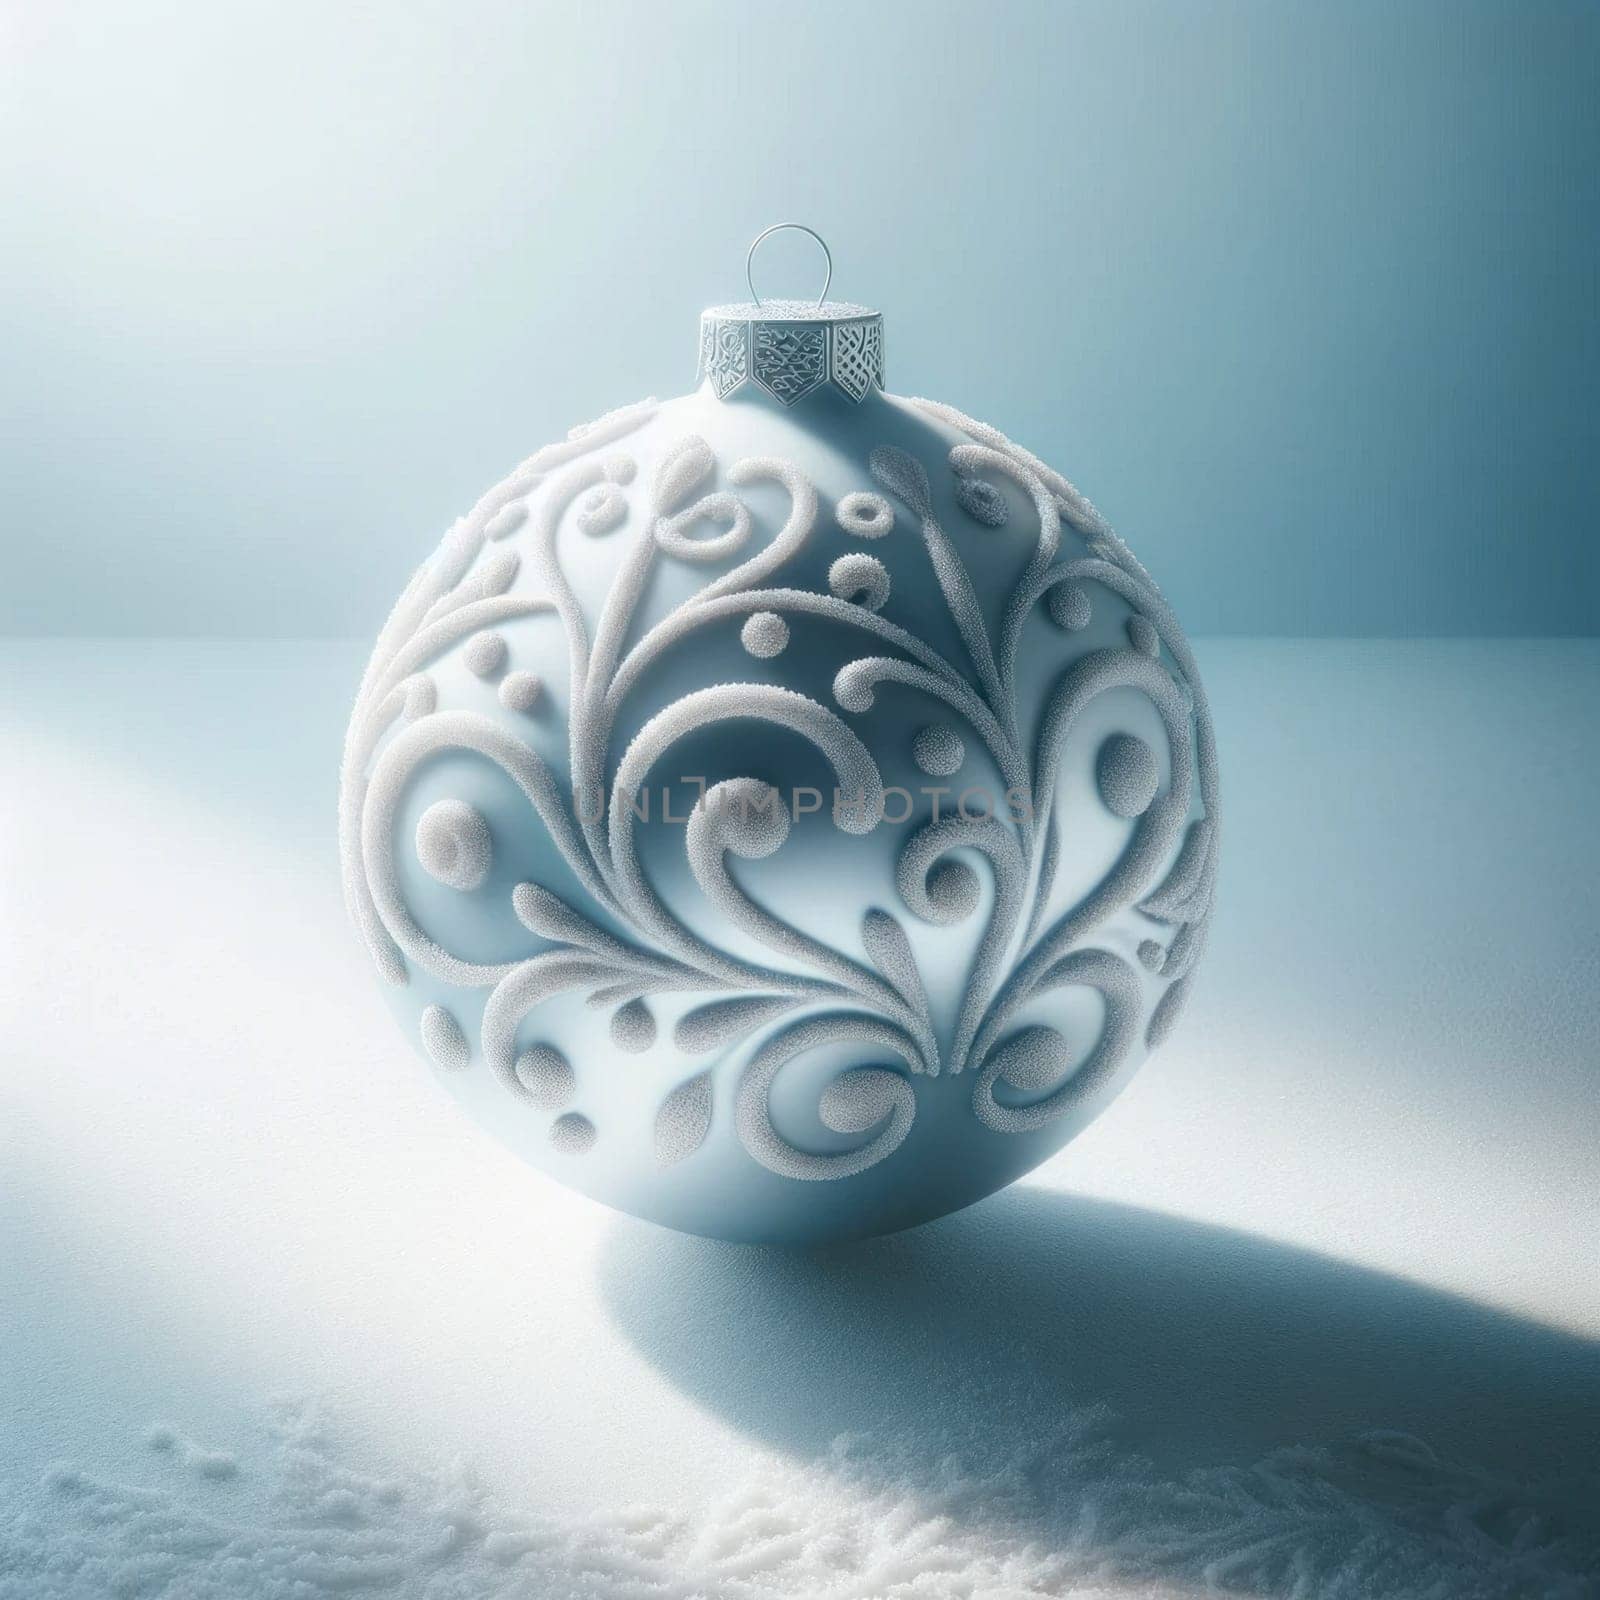 Snowy blue Christmas bauble. Created using AI Generated technology and image editing software.